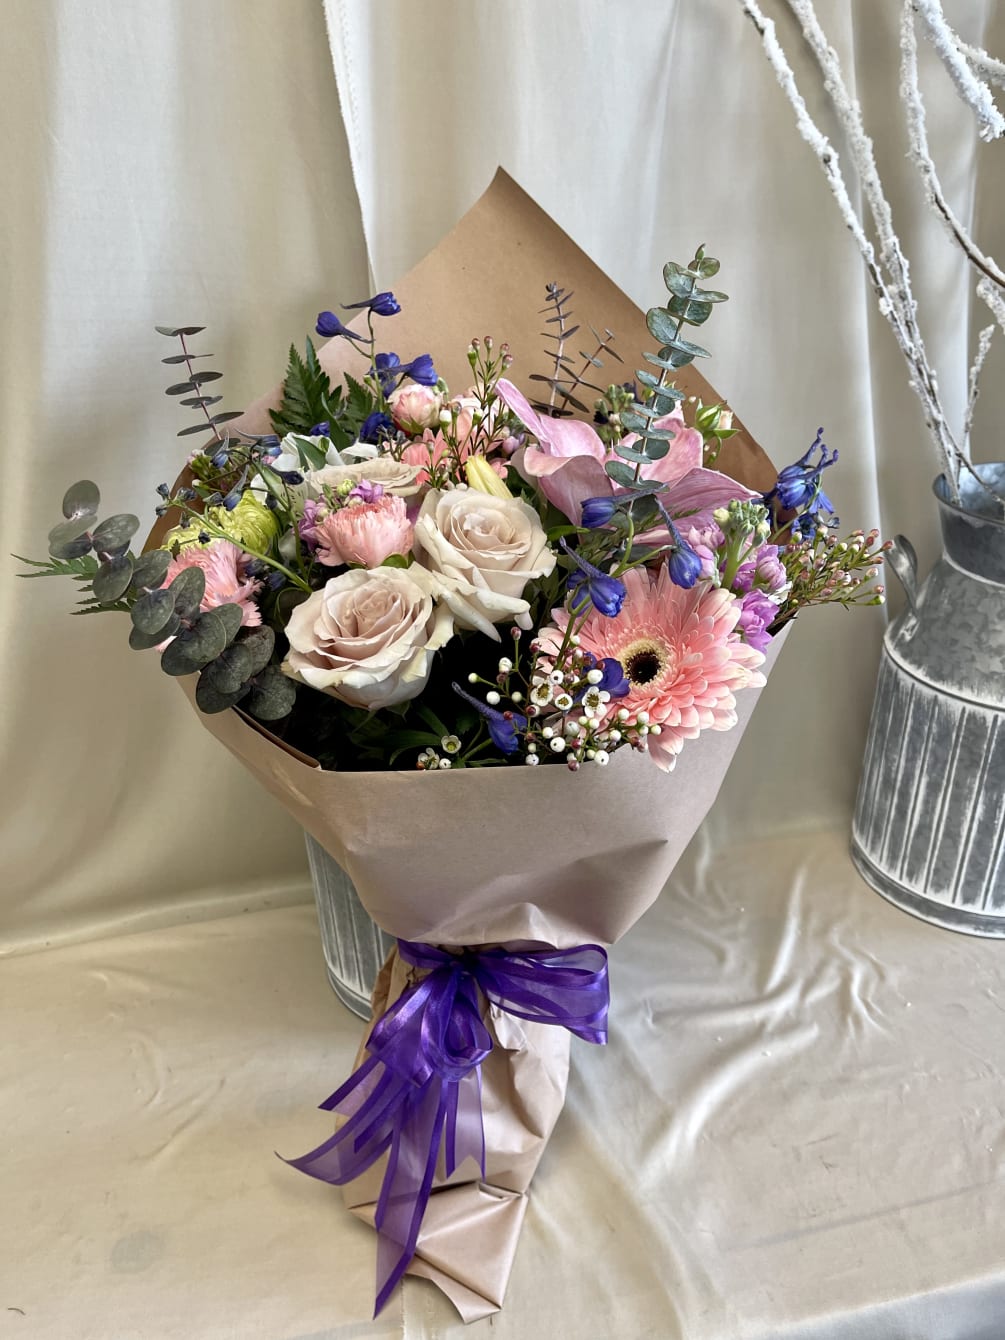 Mix of beautiful premium light colored flowers wrapped. Base included under wrapping